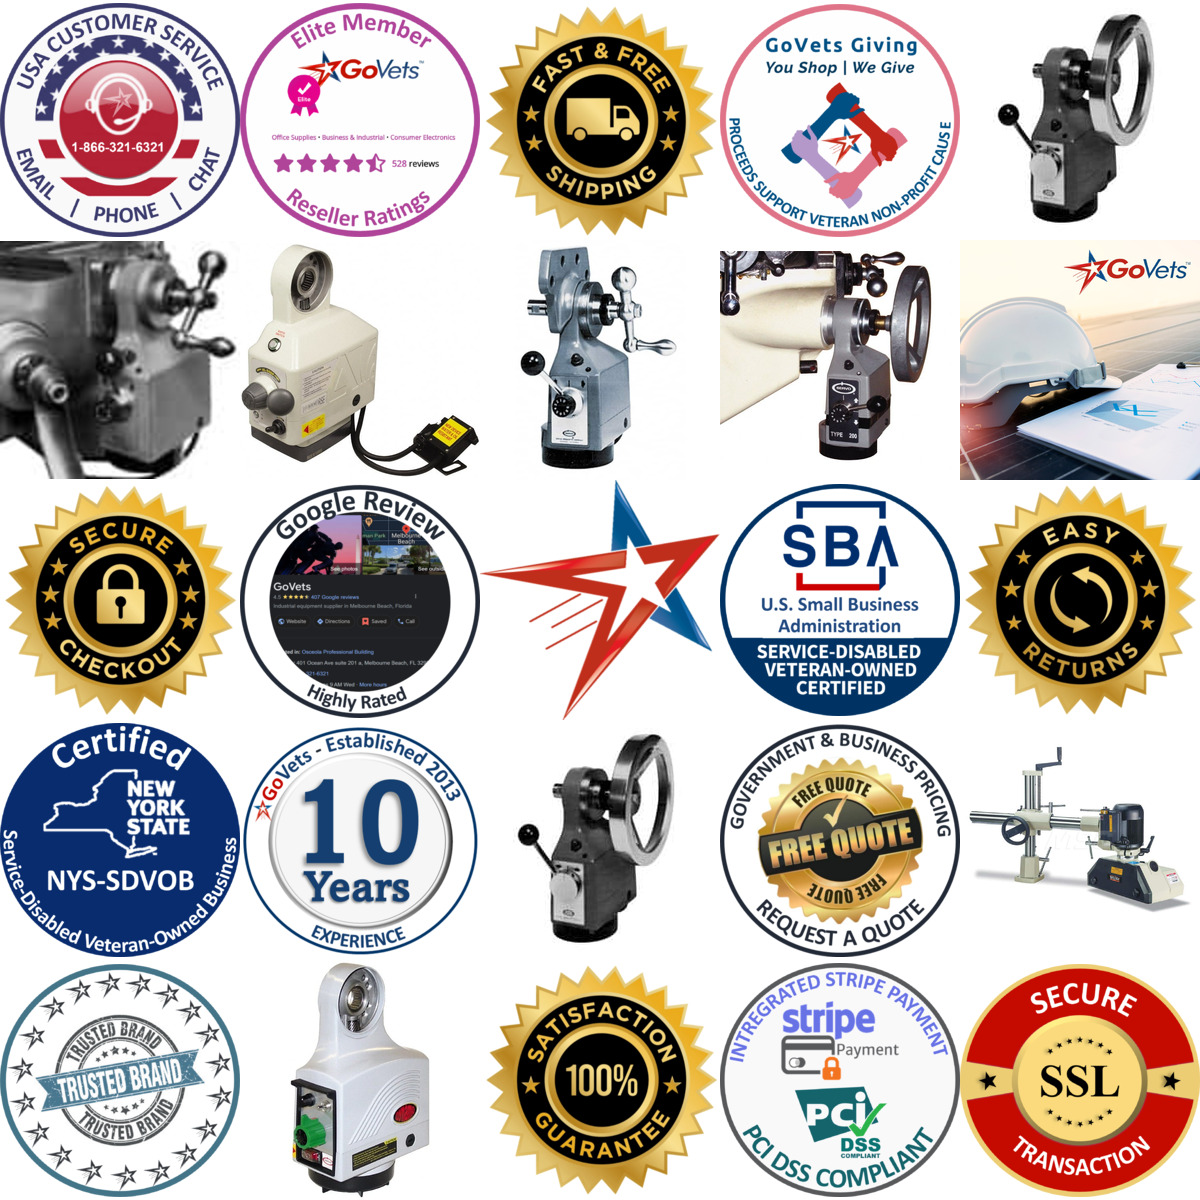 A selection of Milling Machine Power Feeds products on GoVets